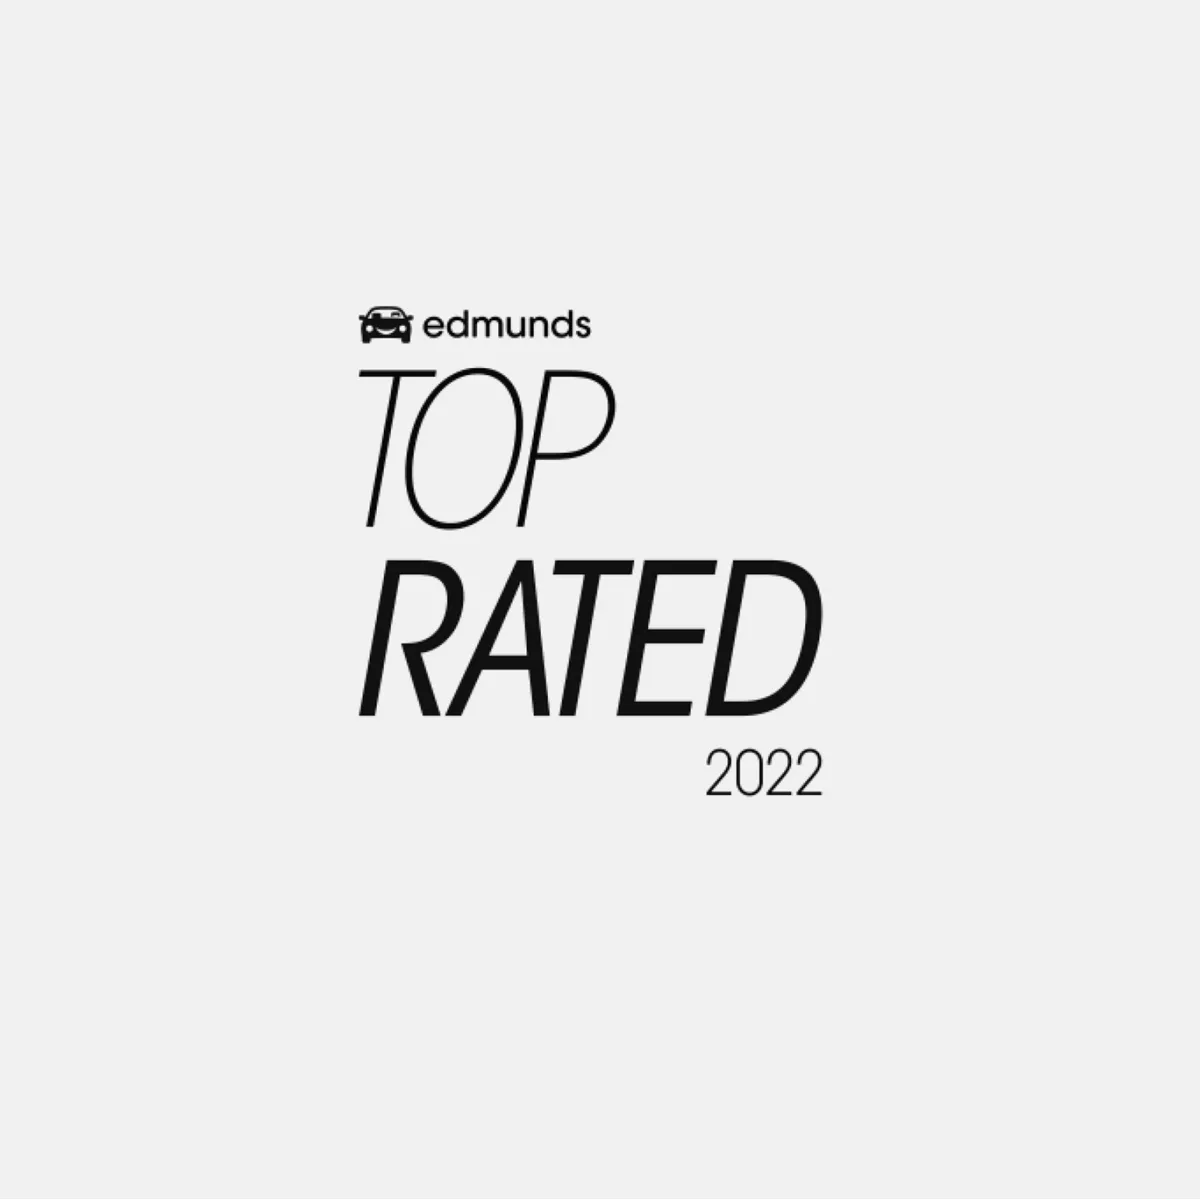 Edmunds top rated 2022.